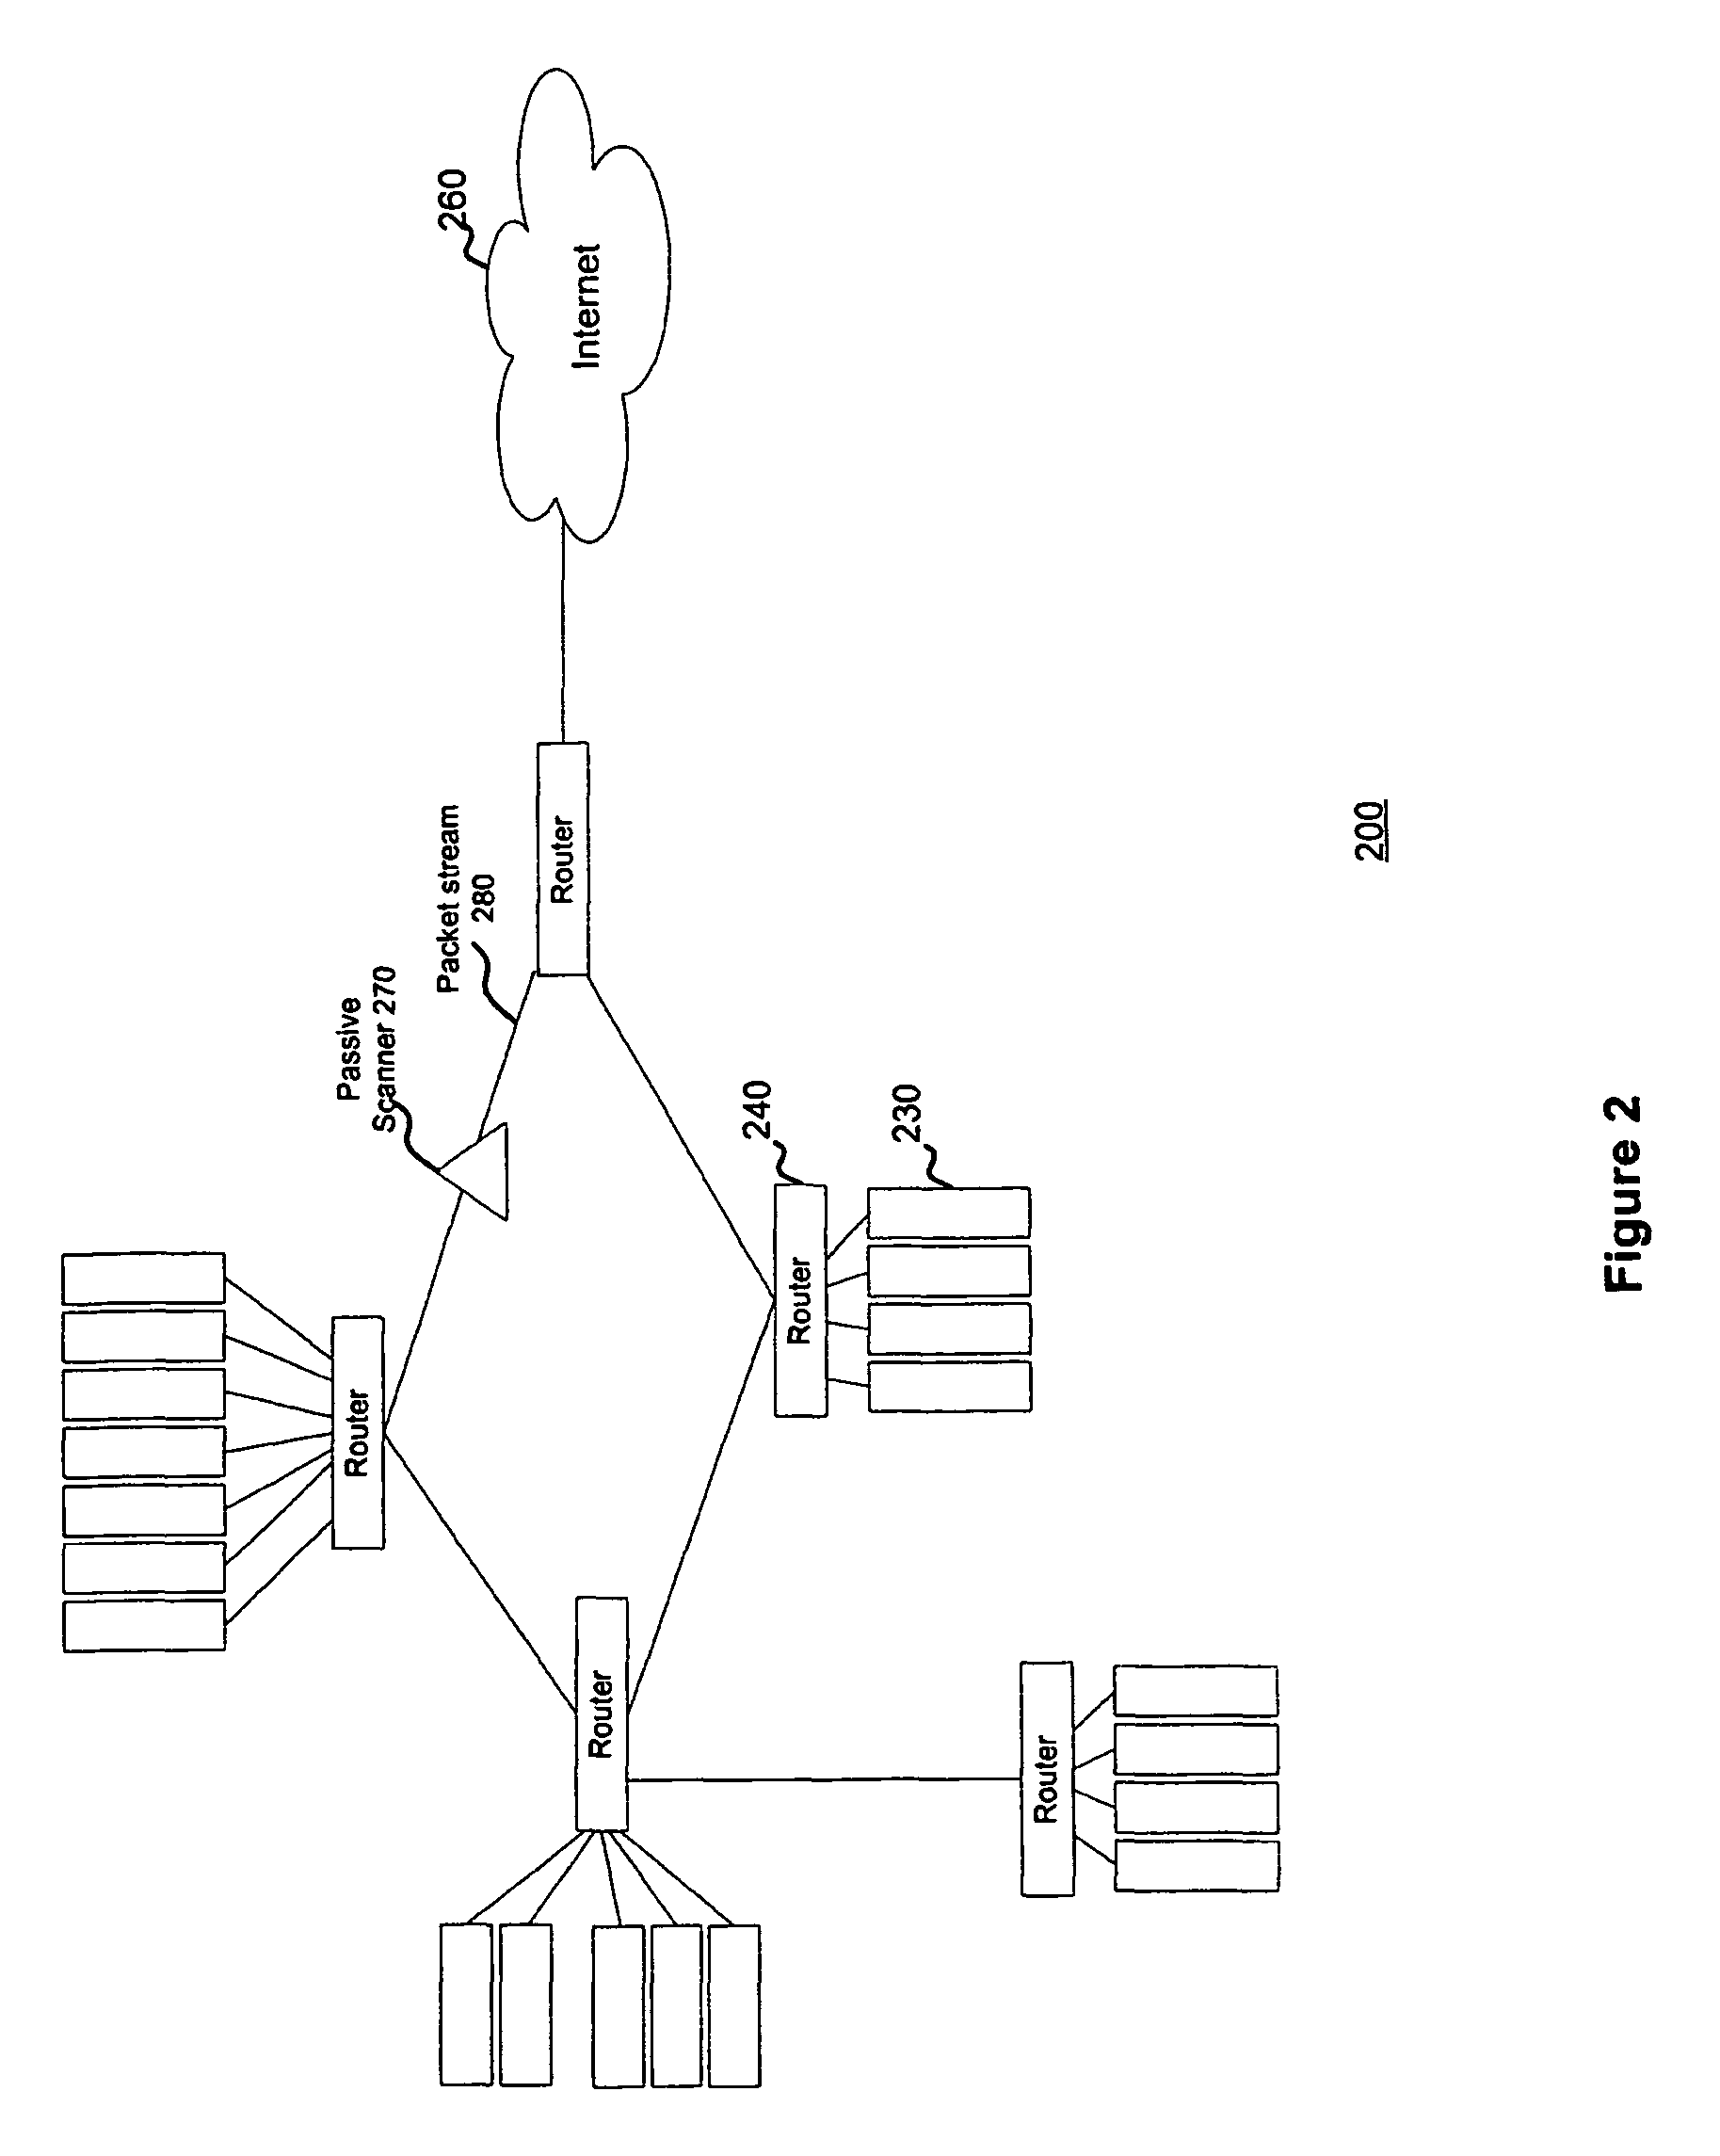 System and method for scanning a network